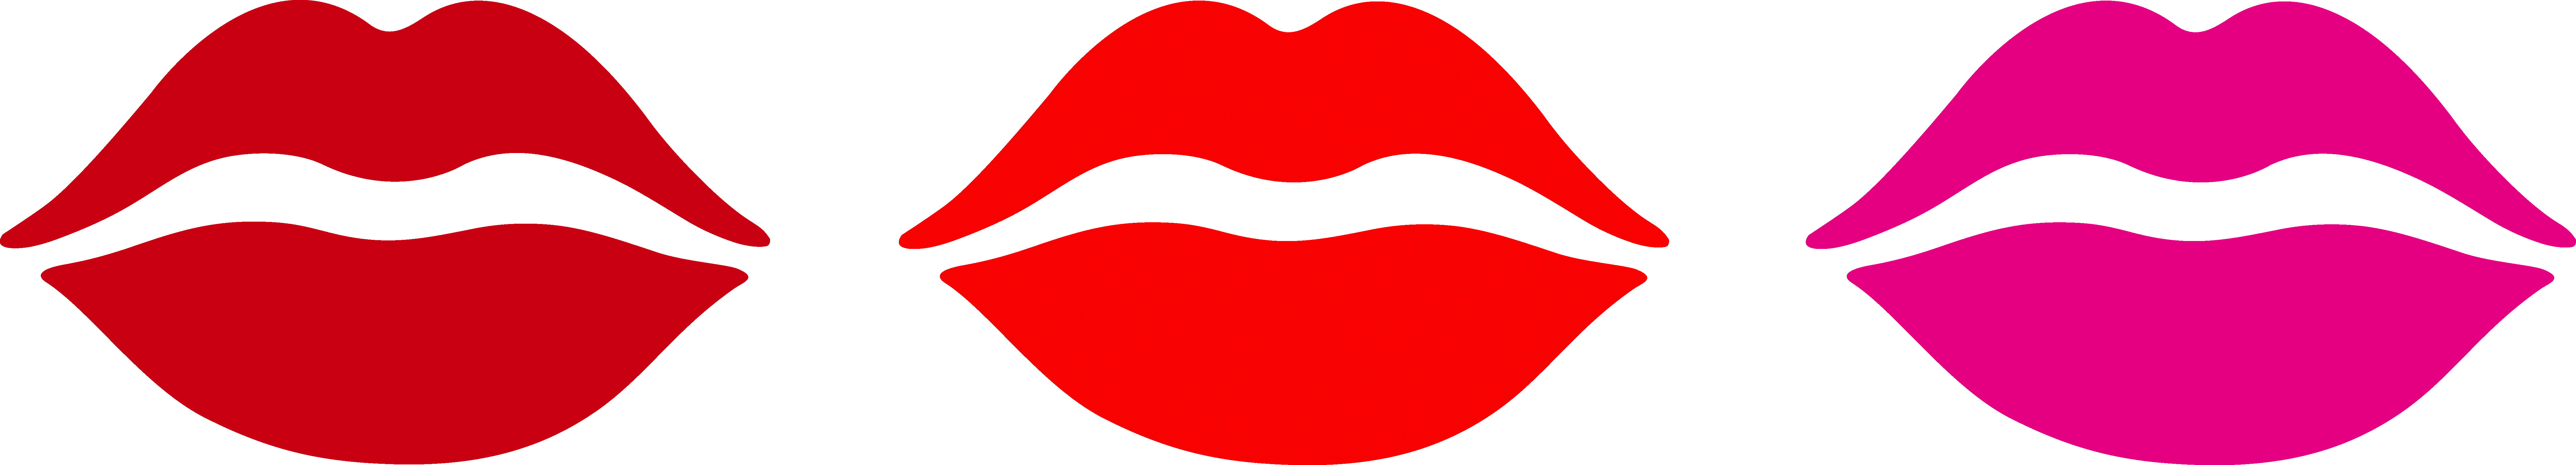 mouth clipart healthy mouth